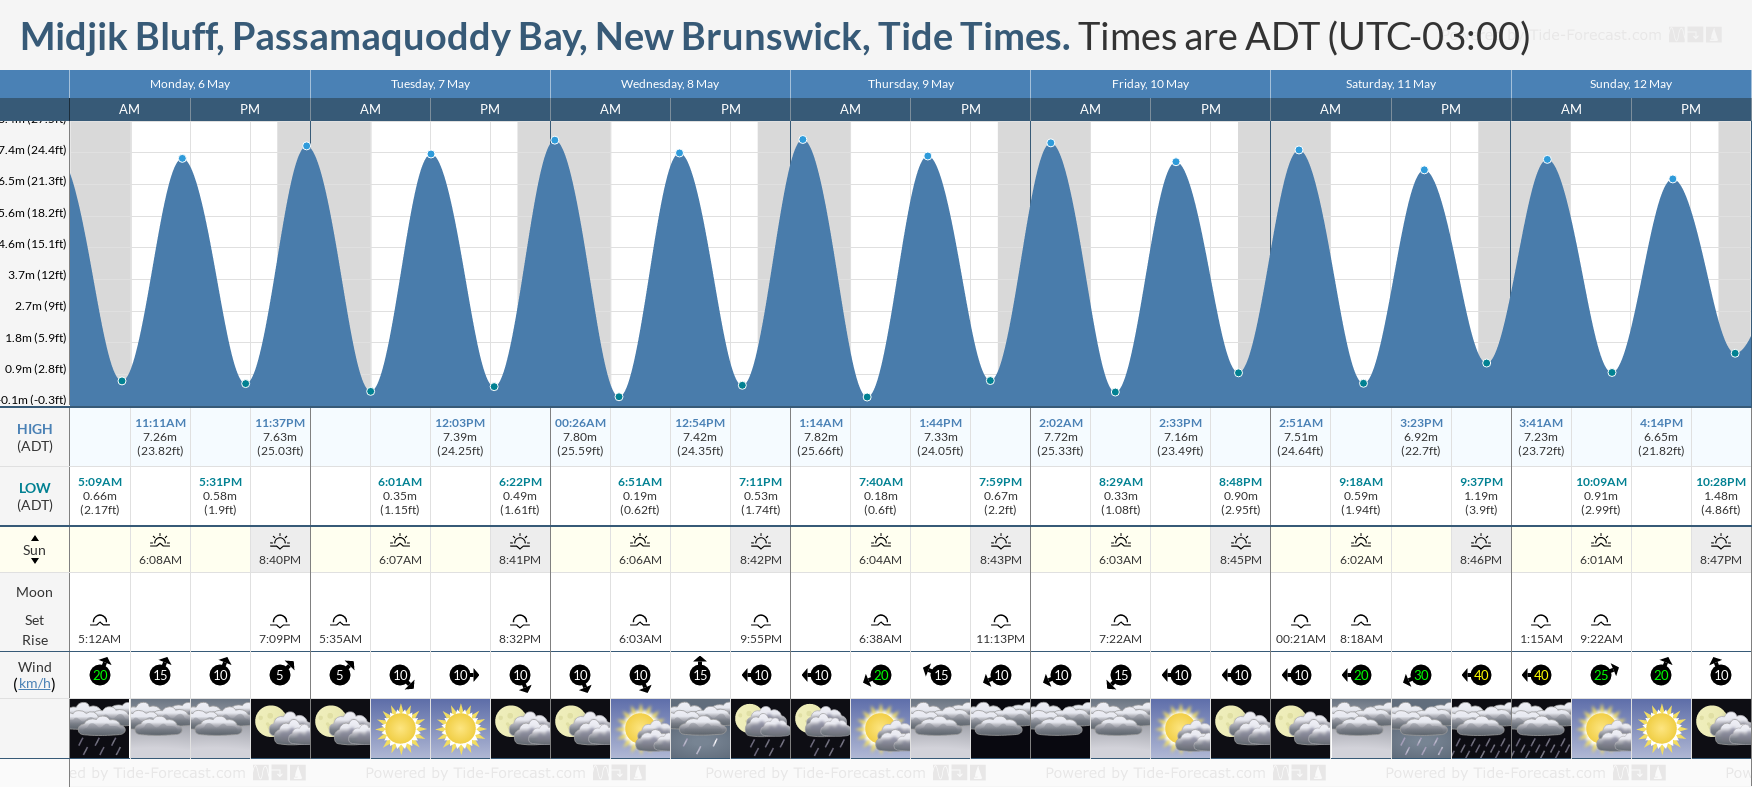 Midjik Bluff, Passamaquoddy Bay, New Brunswick Tide Chart including high and low tide tide times for the next 7 days